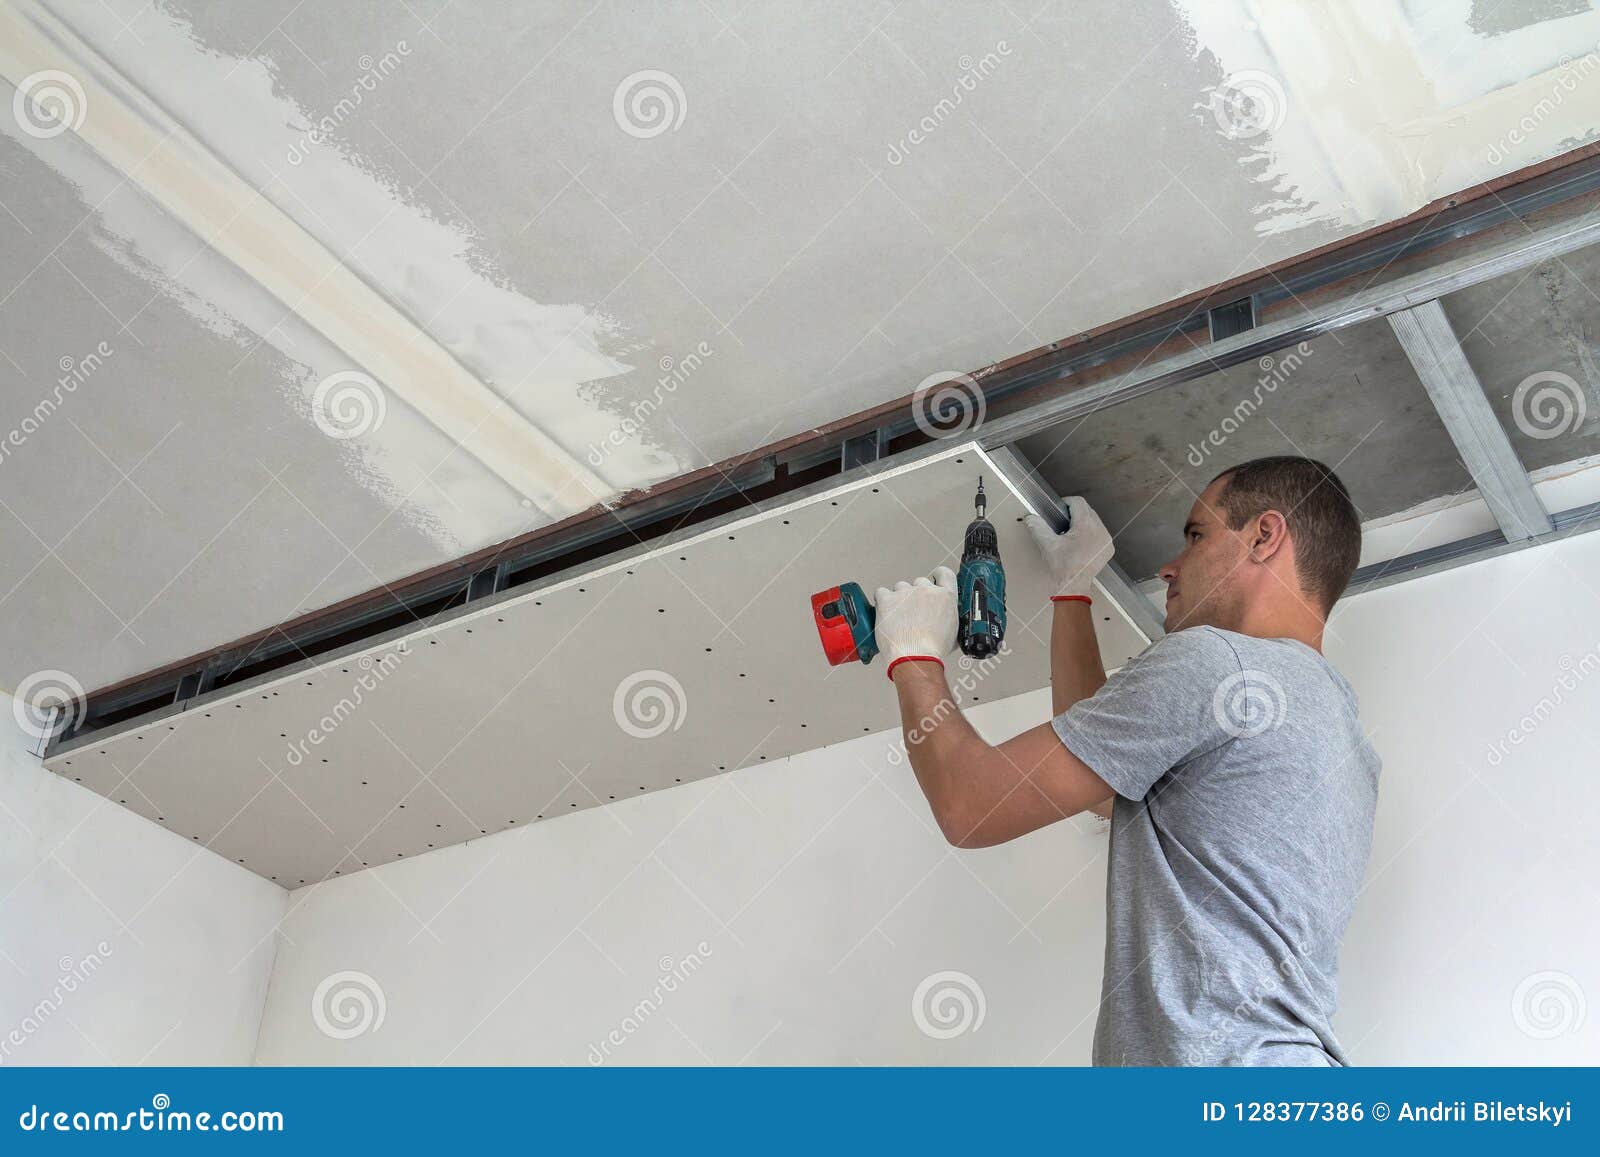 Young Man In Usual Clothing And Work Gloves Fixing Drywall